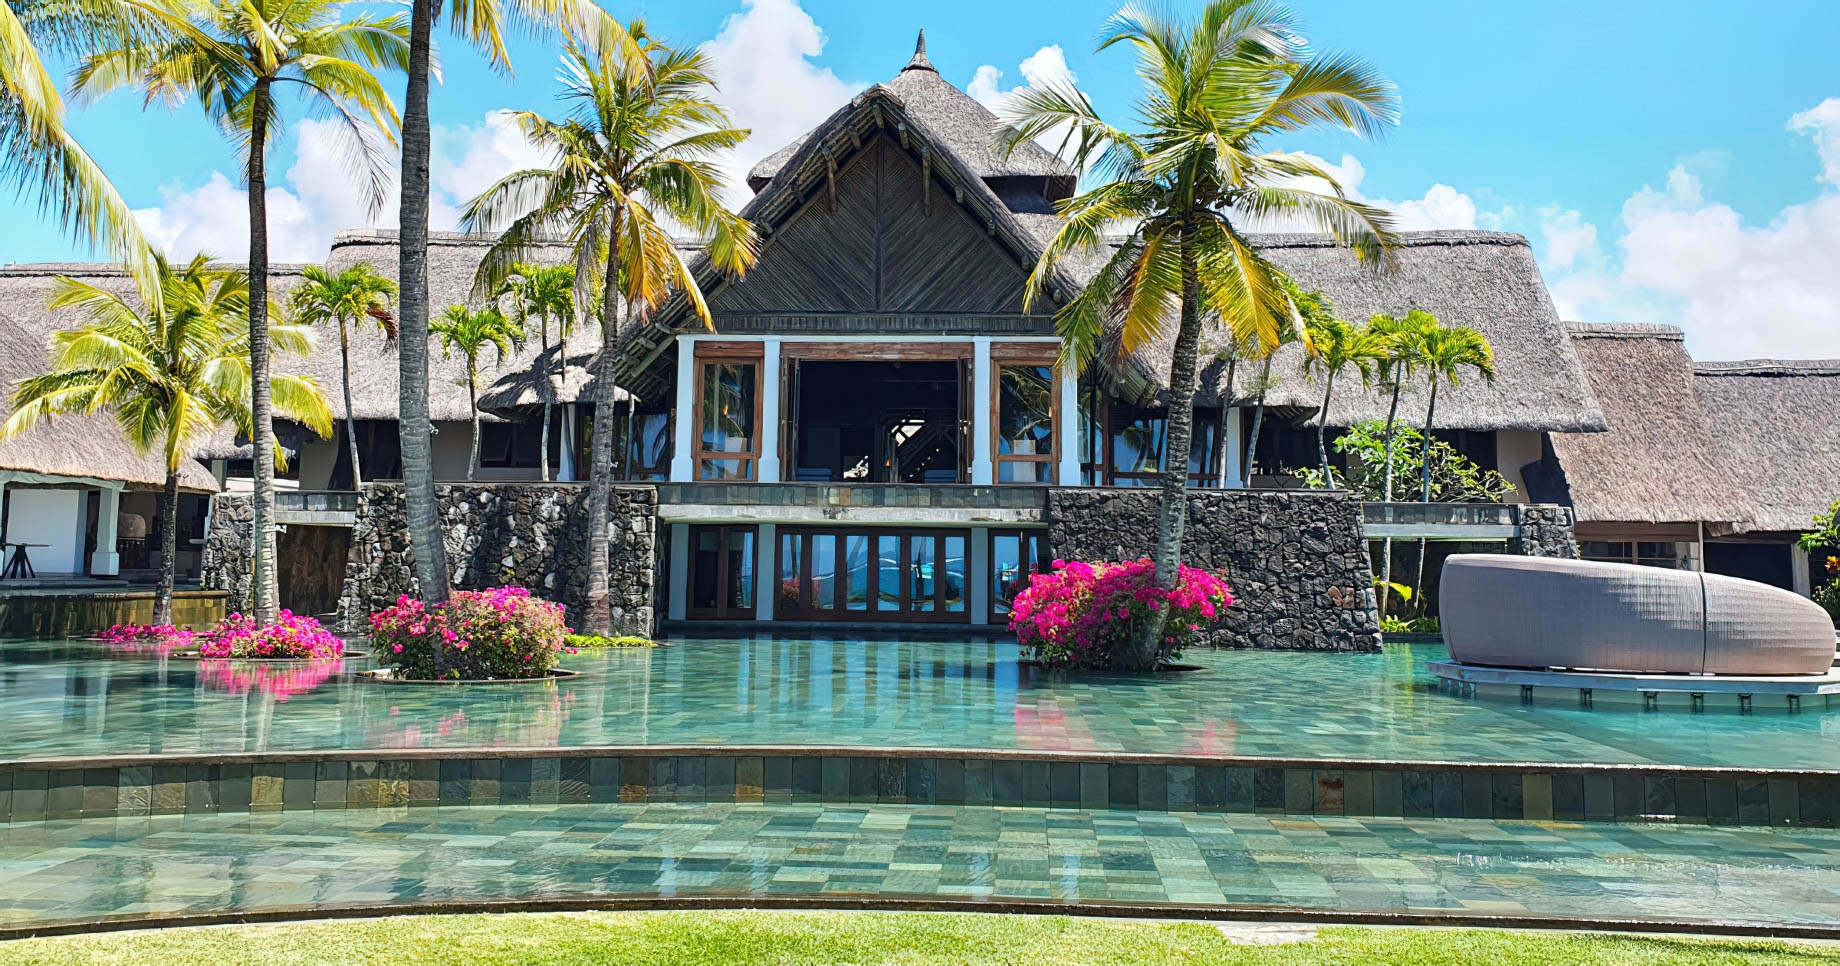 Constance Belle Mare Plage Resort – Mauritius – Lobby Exterior Reflection Pool